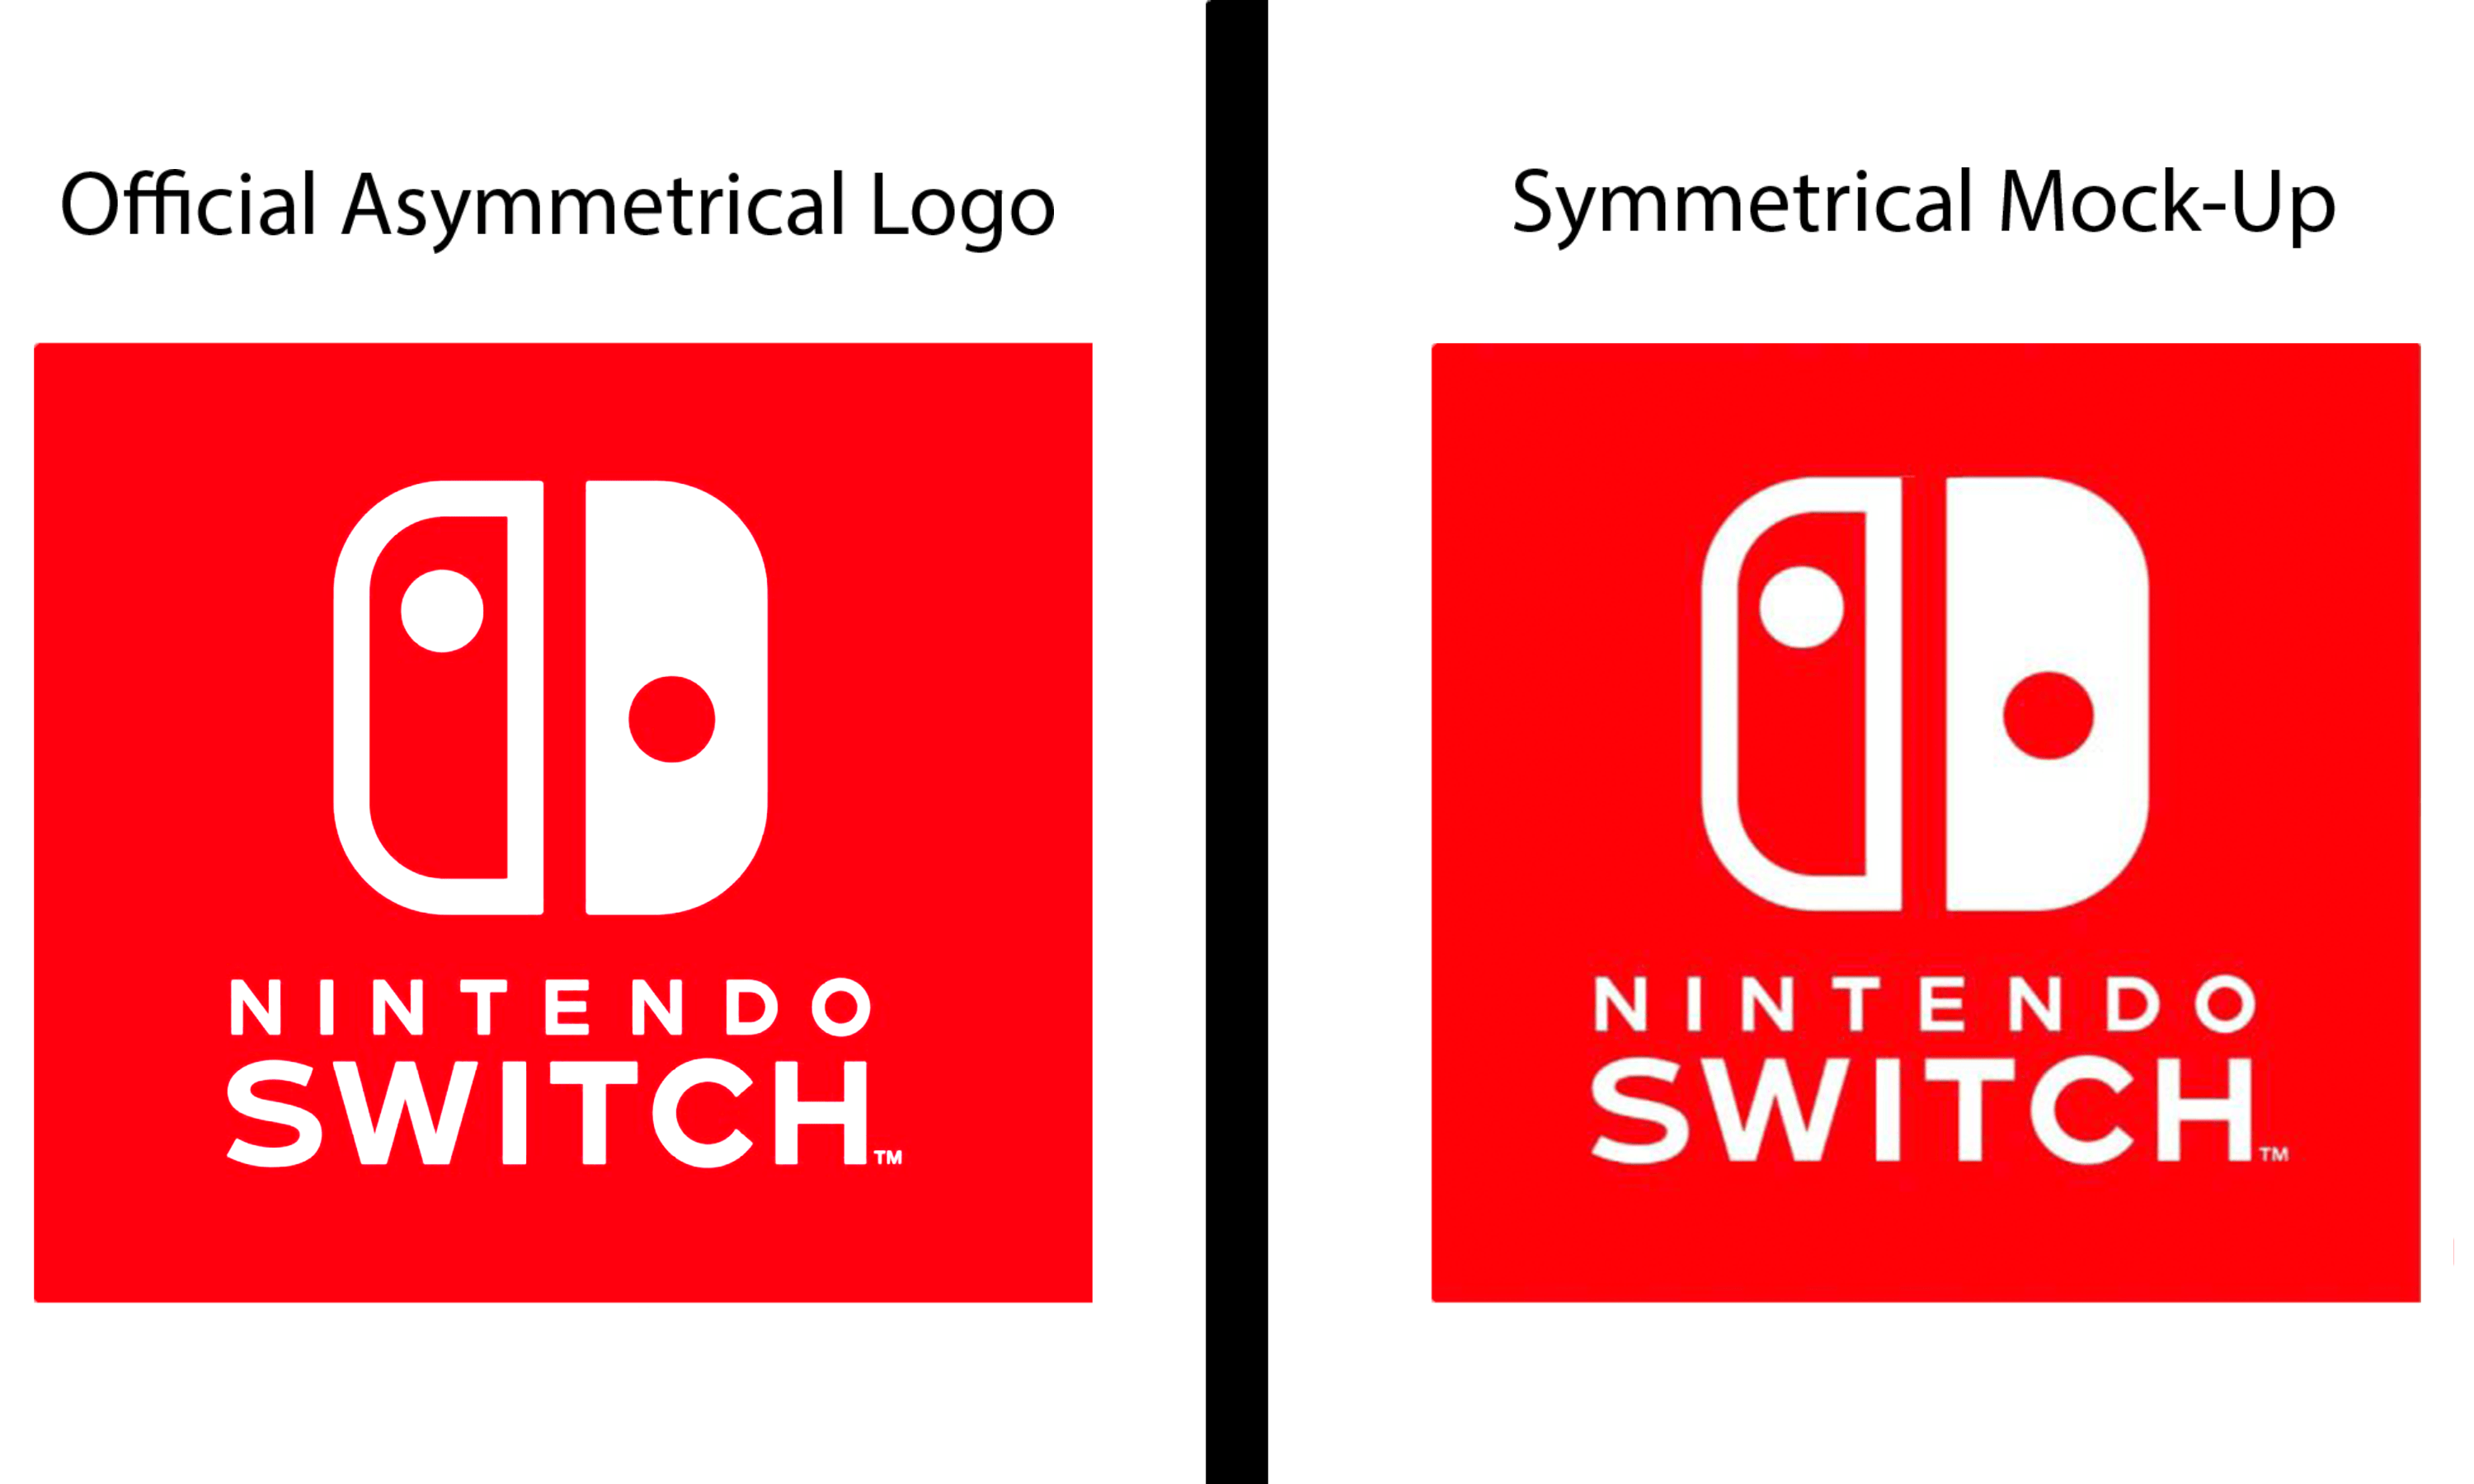 Switch Logo - The Nintendo Switch logo is intentionally asymmetrical in order to